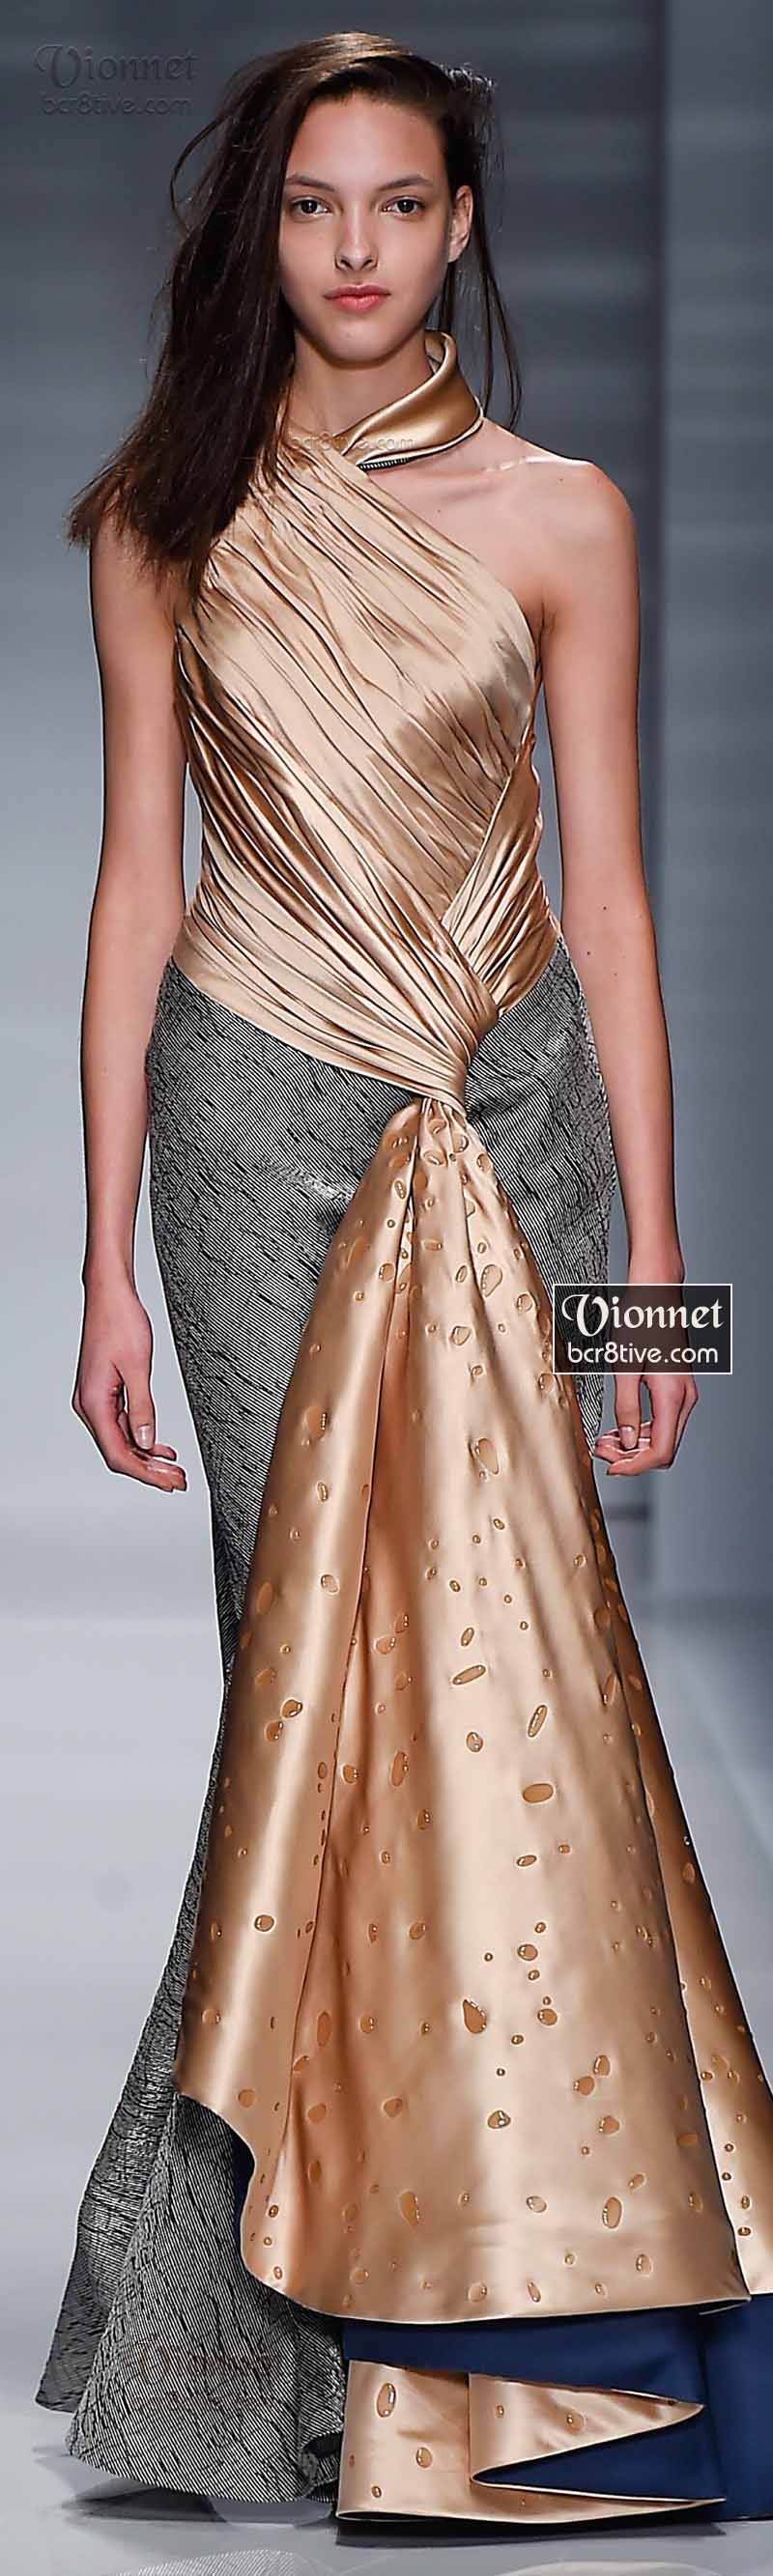 Vionnet Fall Winter 2014-15 Couture – Be Creative